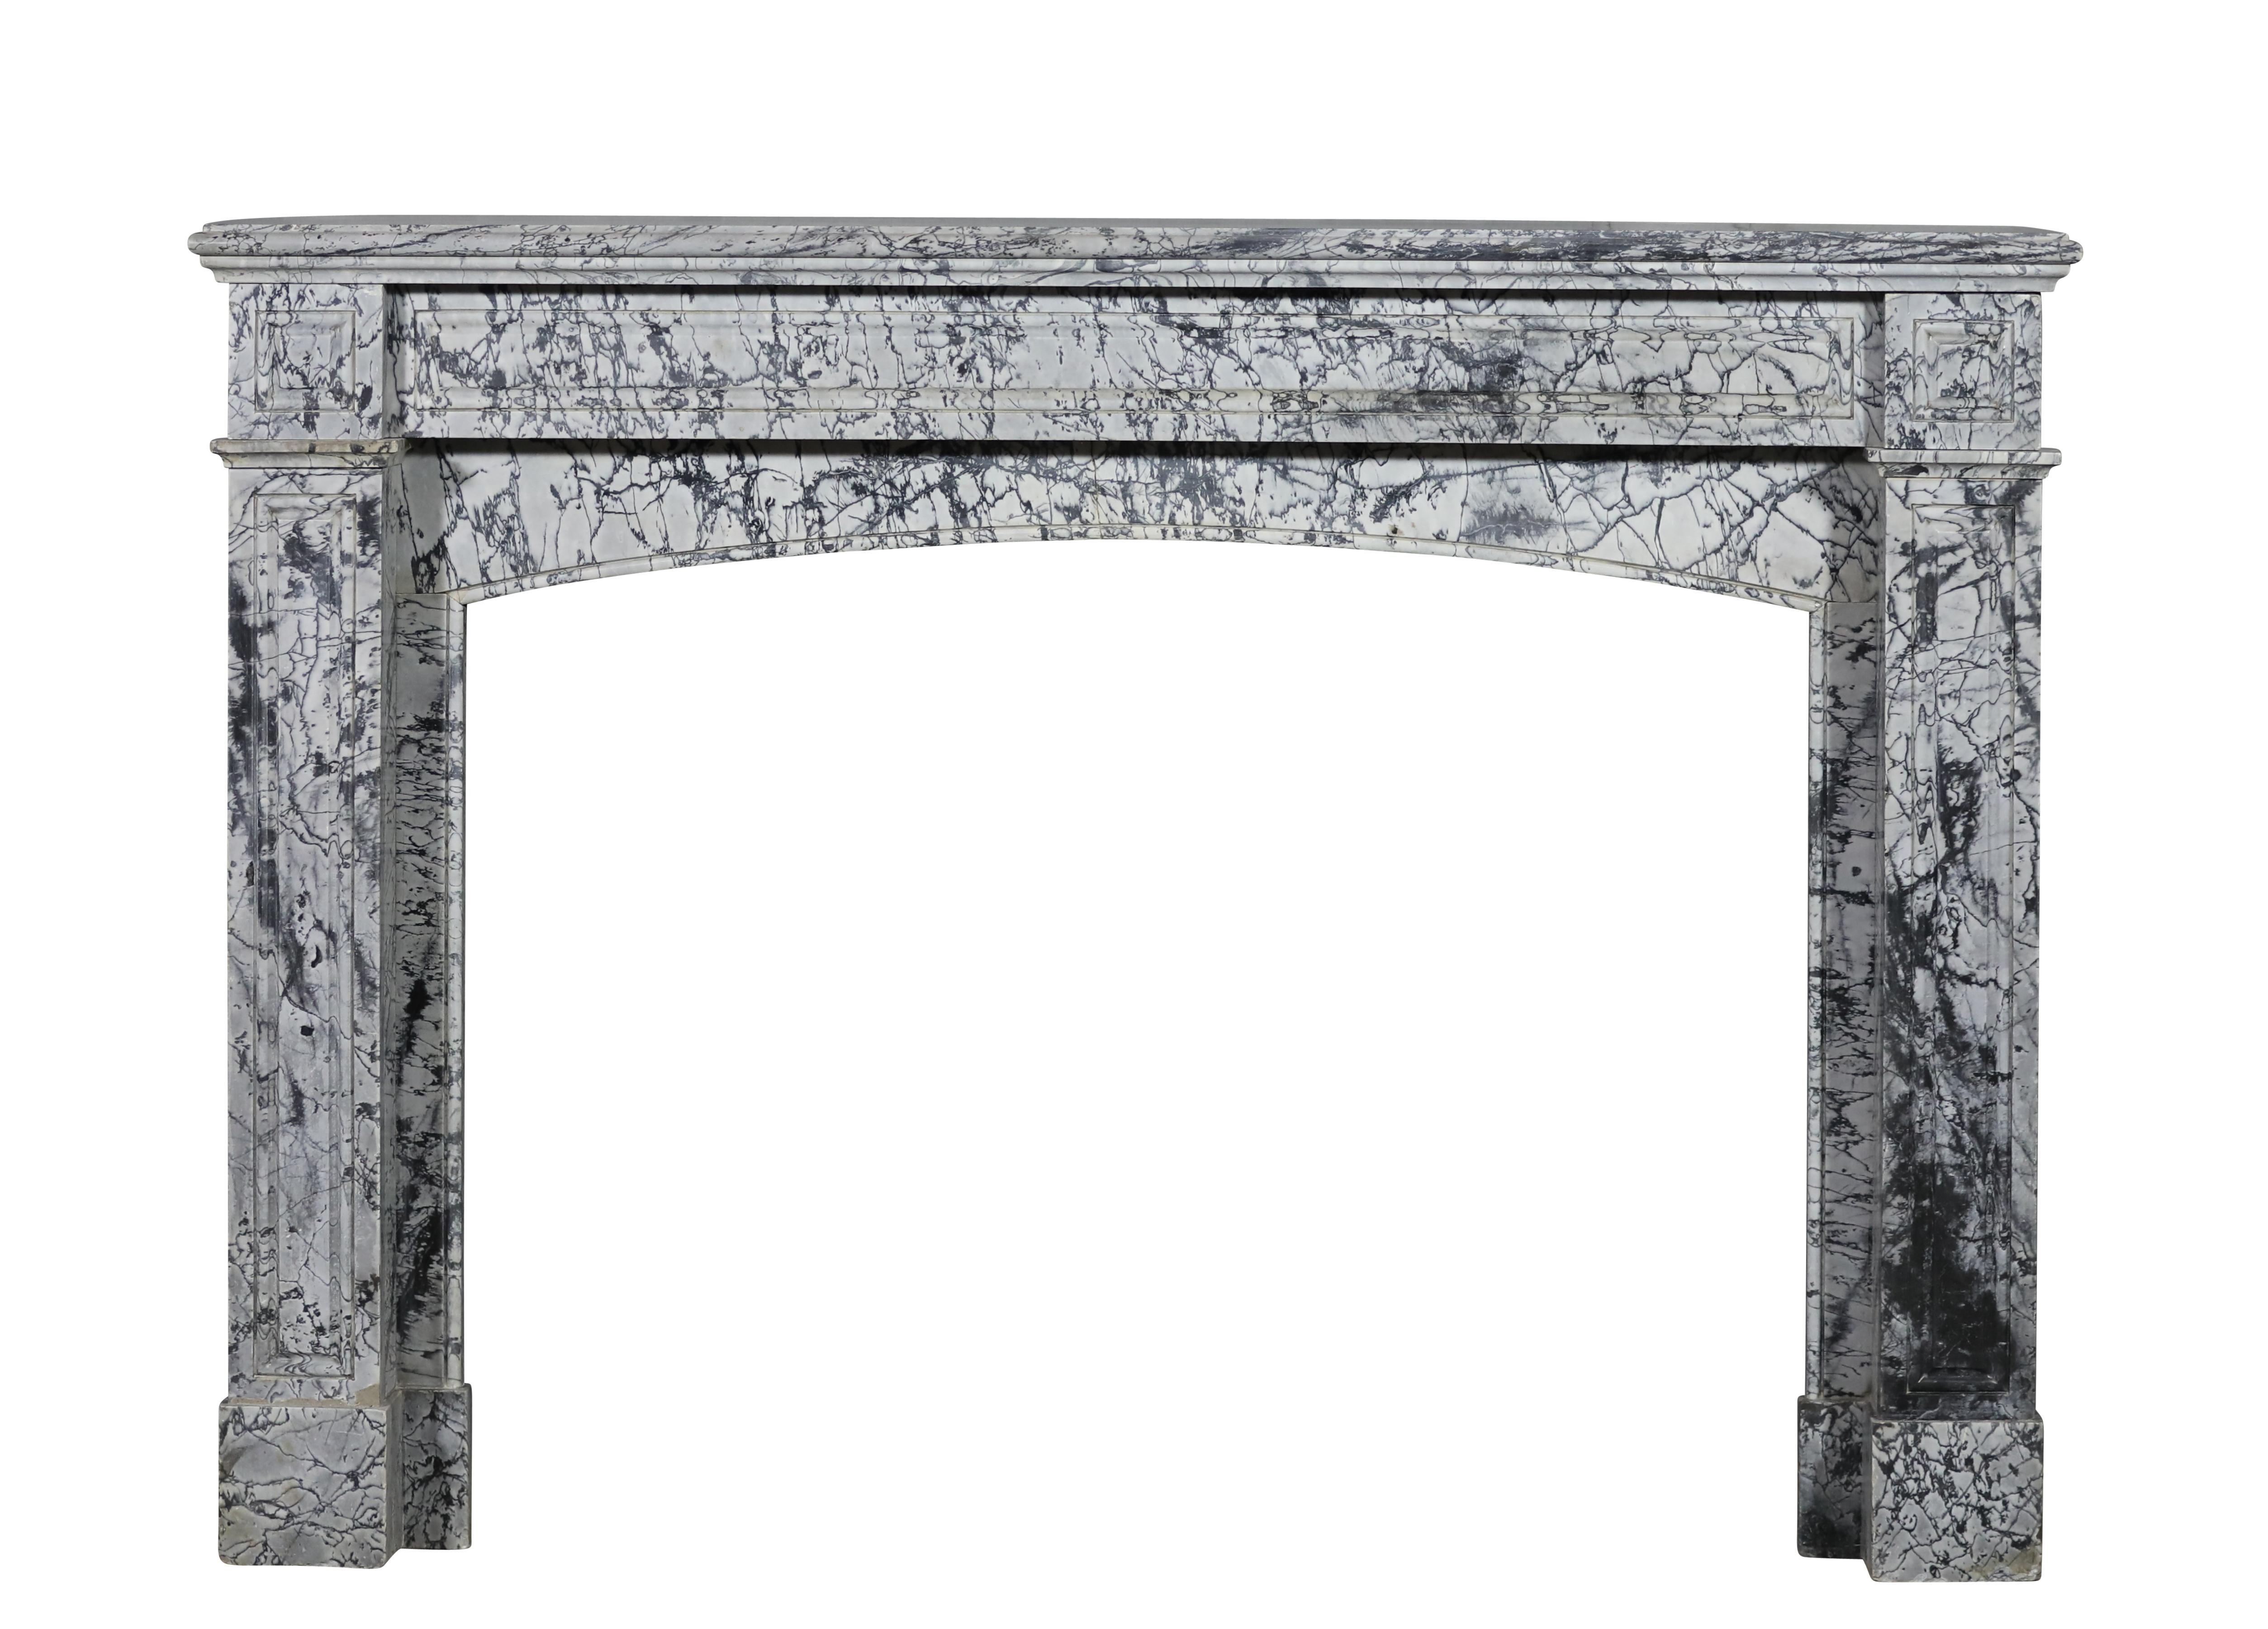 Hand-Carved Bleu Turquin Marble Fireplace Surround In Great Condition For Timeless Design For Sale